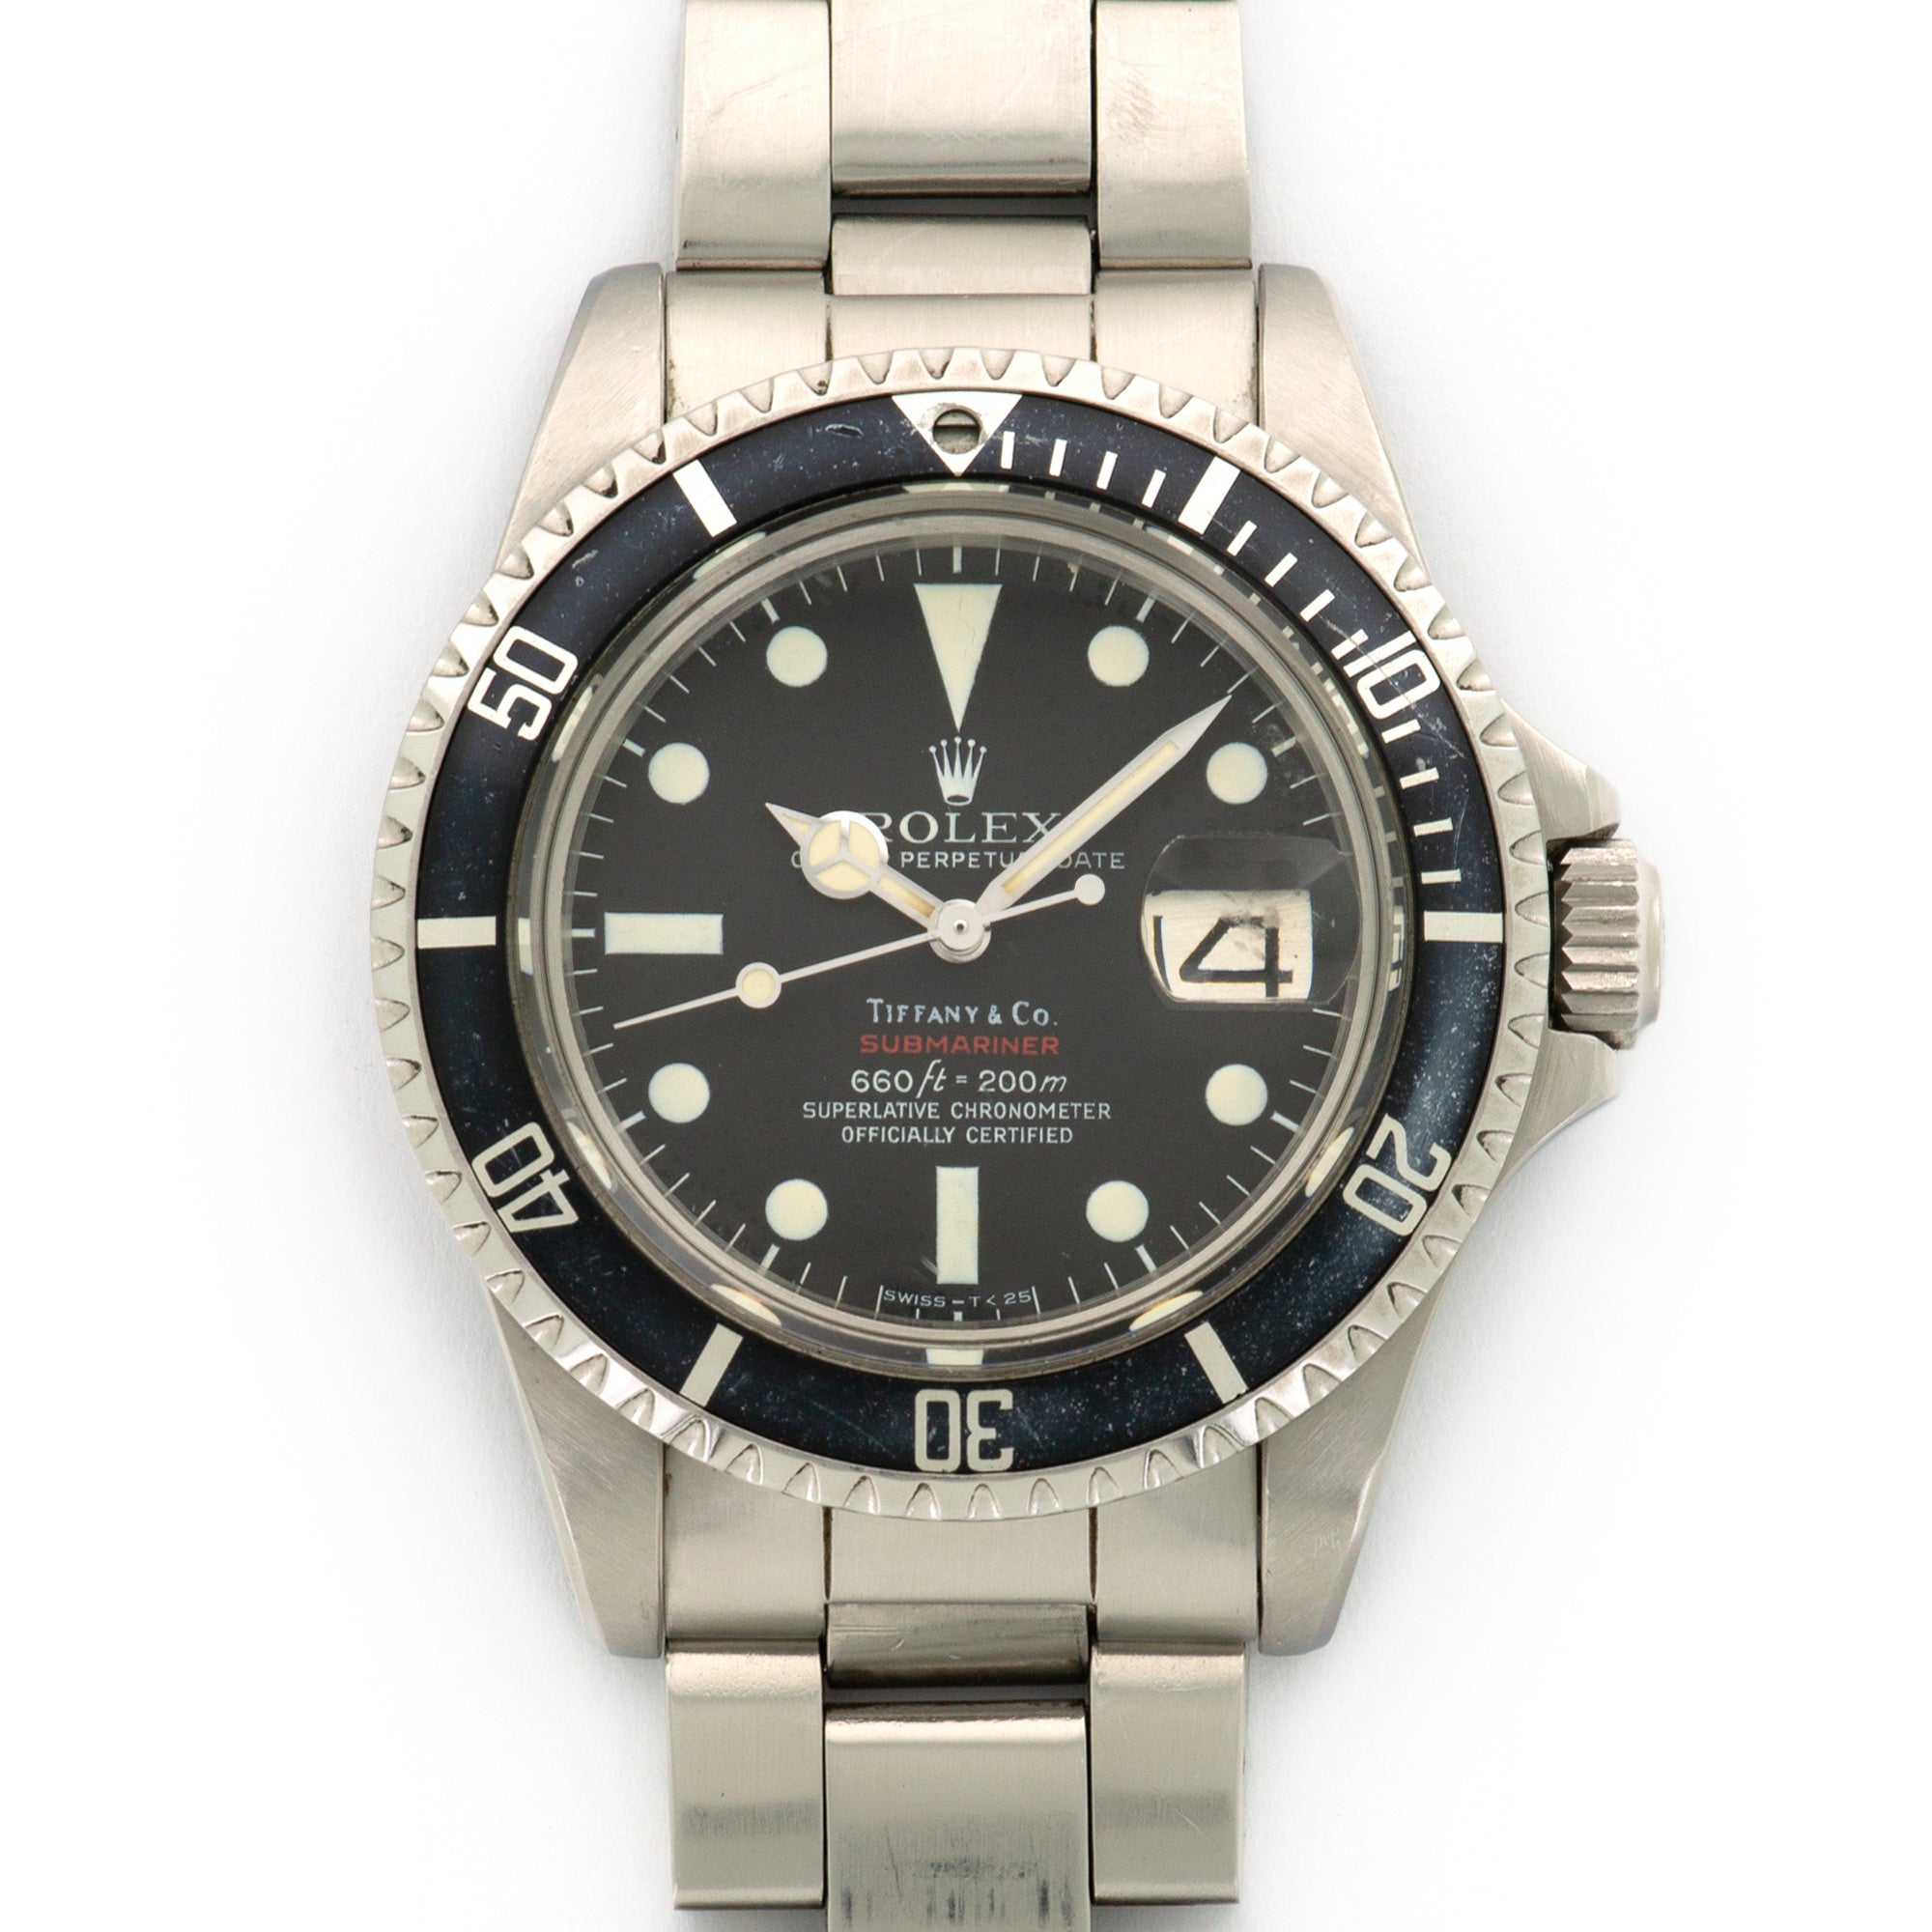 Rolex - Rolex Red Submariner Watch Ref. 1680 Retailed by Tiffany & Co. - The Keystone Watches